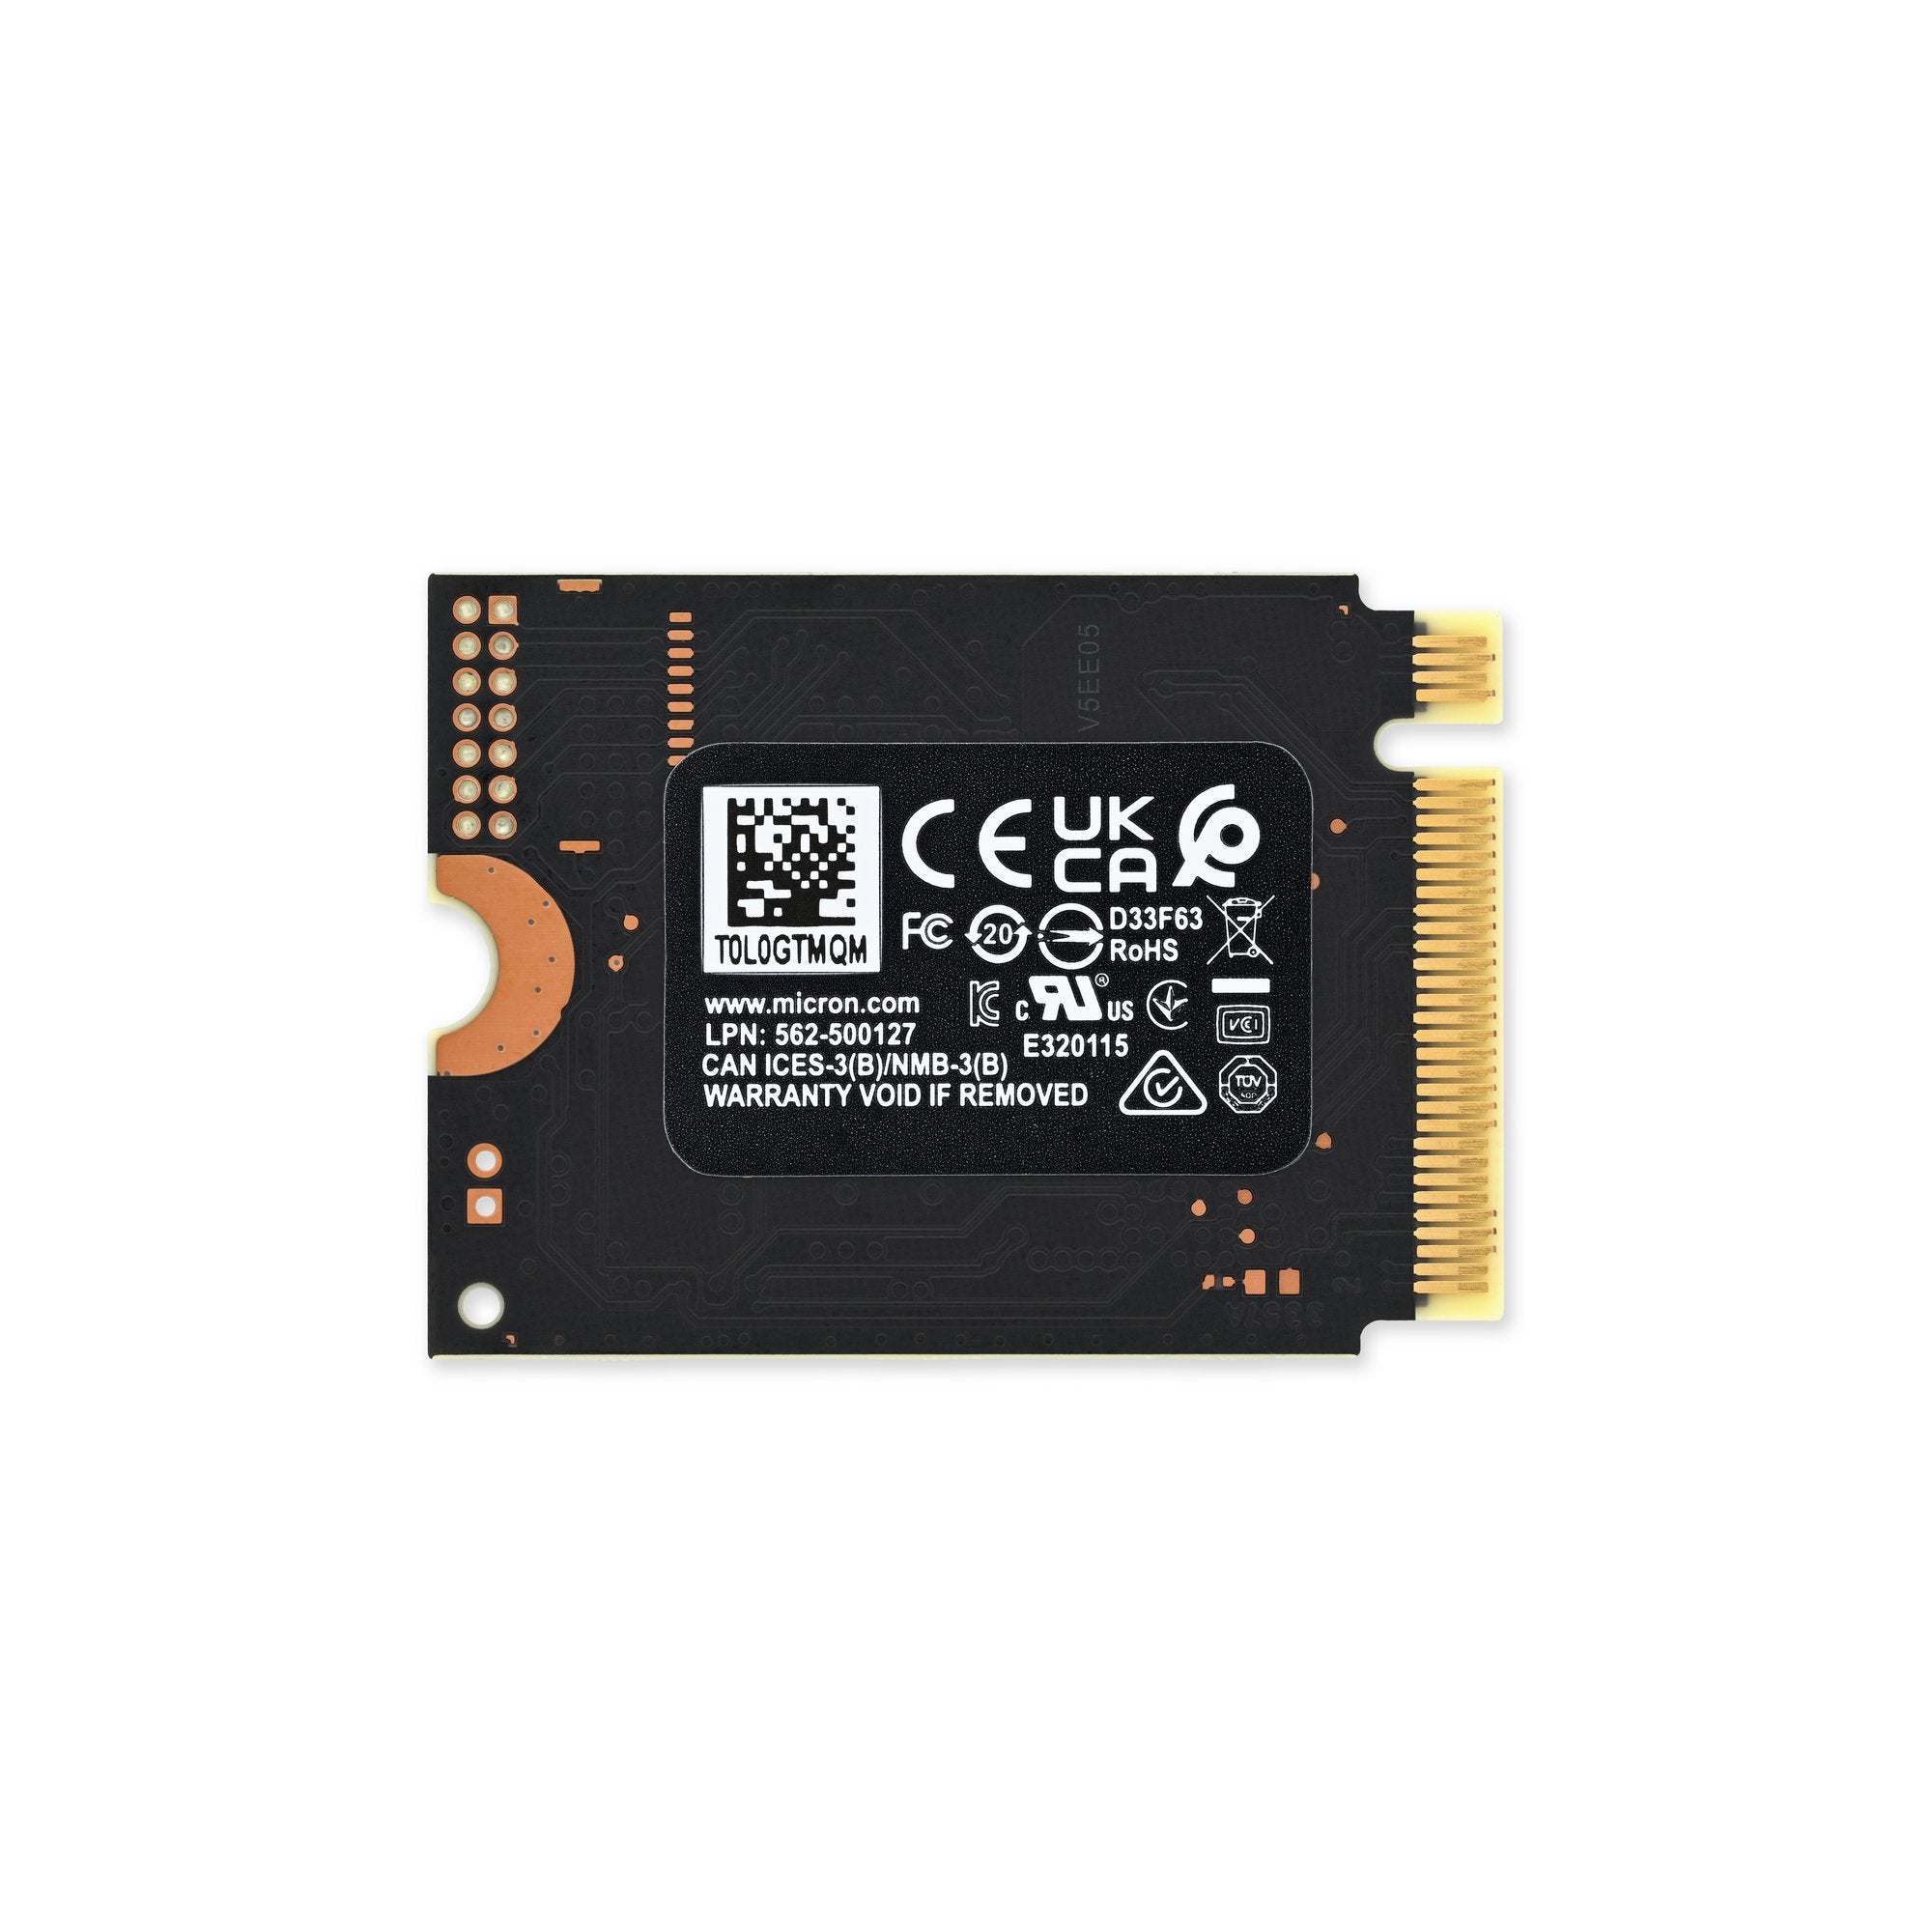 Is this Micron 2230 SSD going to work? : r/SteamDeck